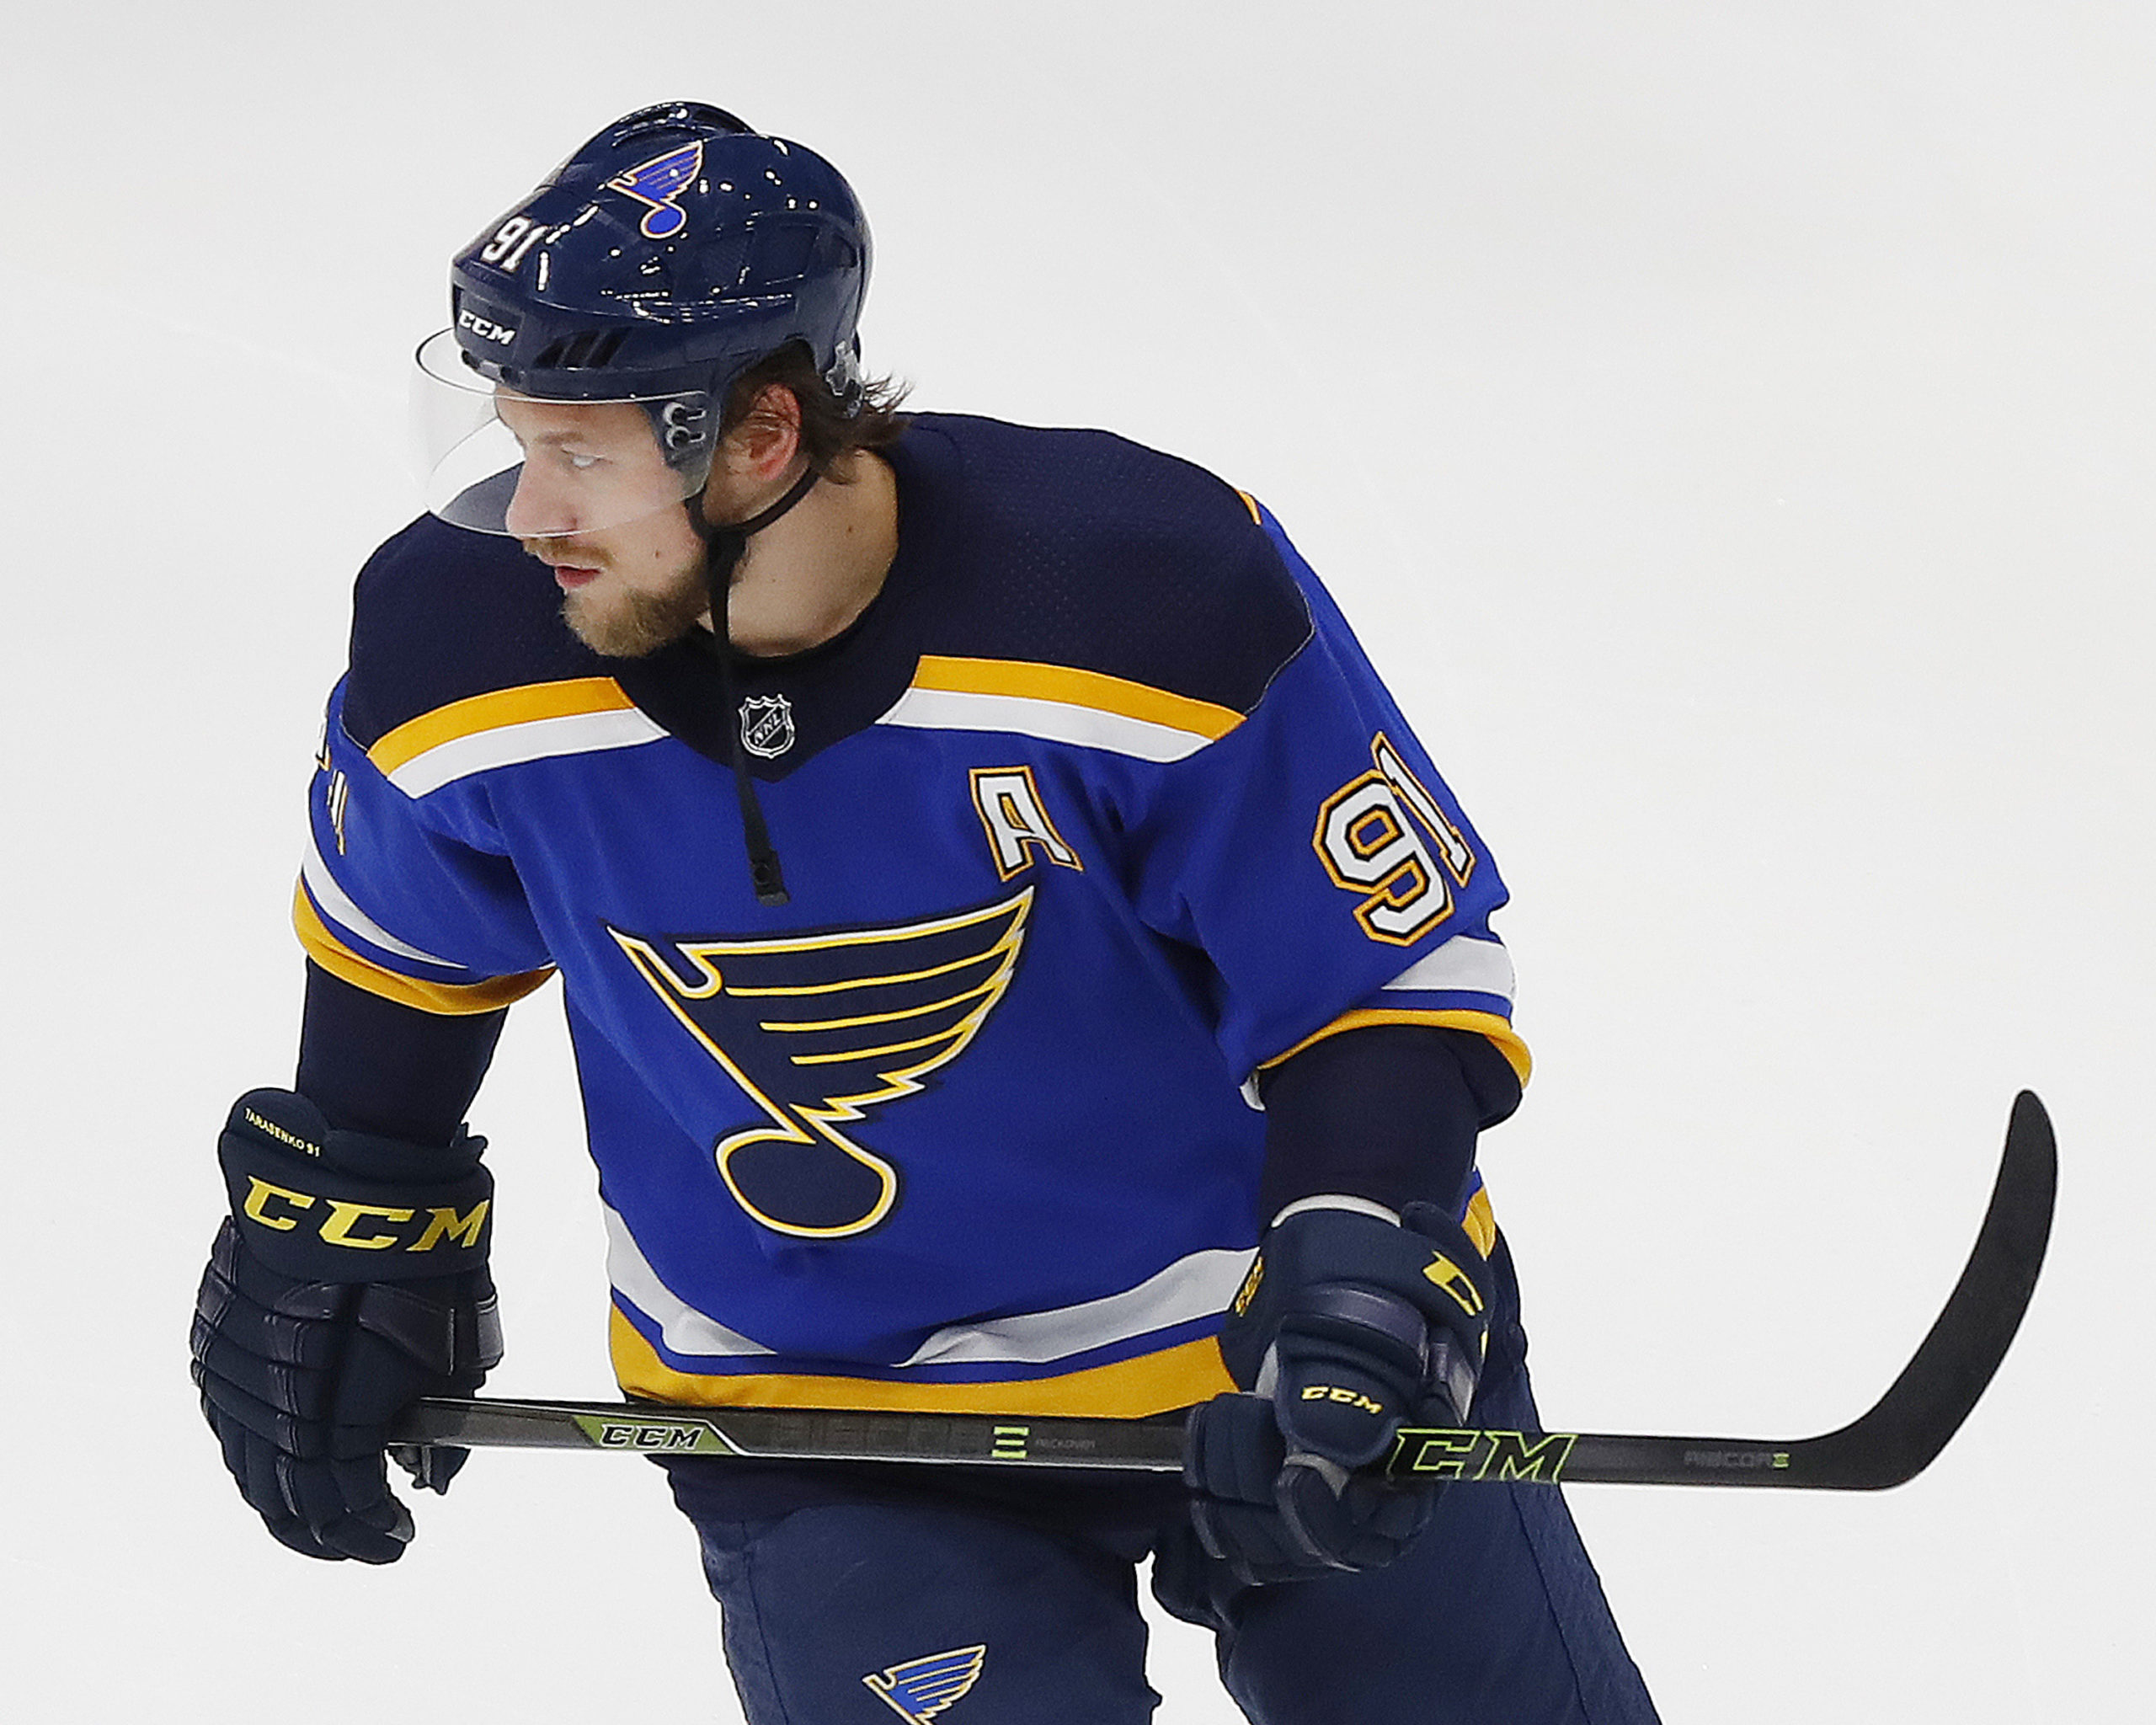 Four Reasons Vladimir Tarasenko's Number 91 will be hung up in the